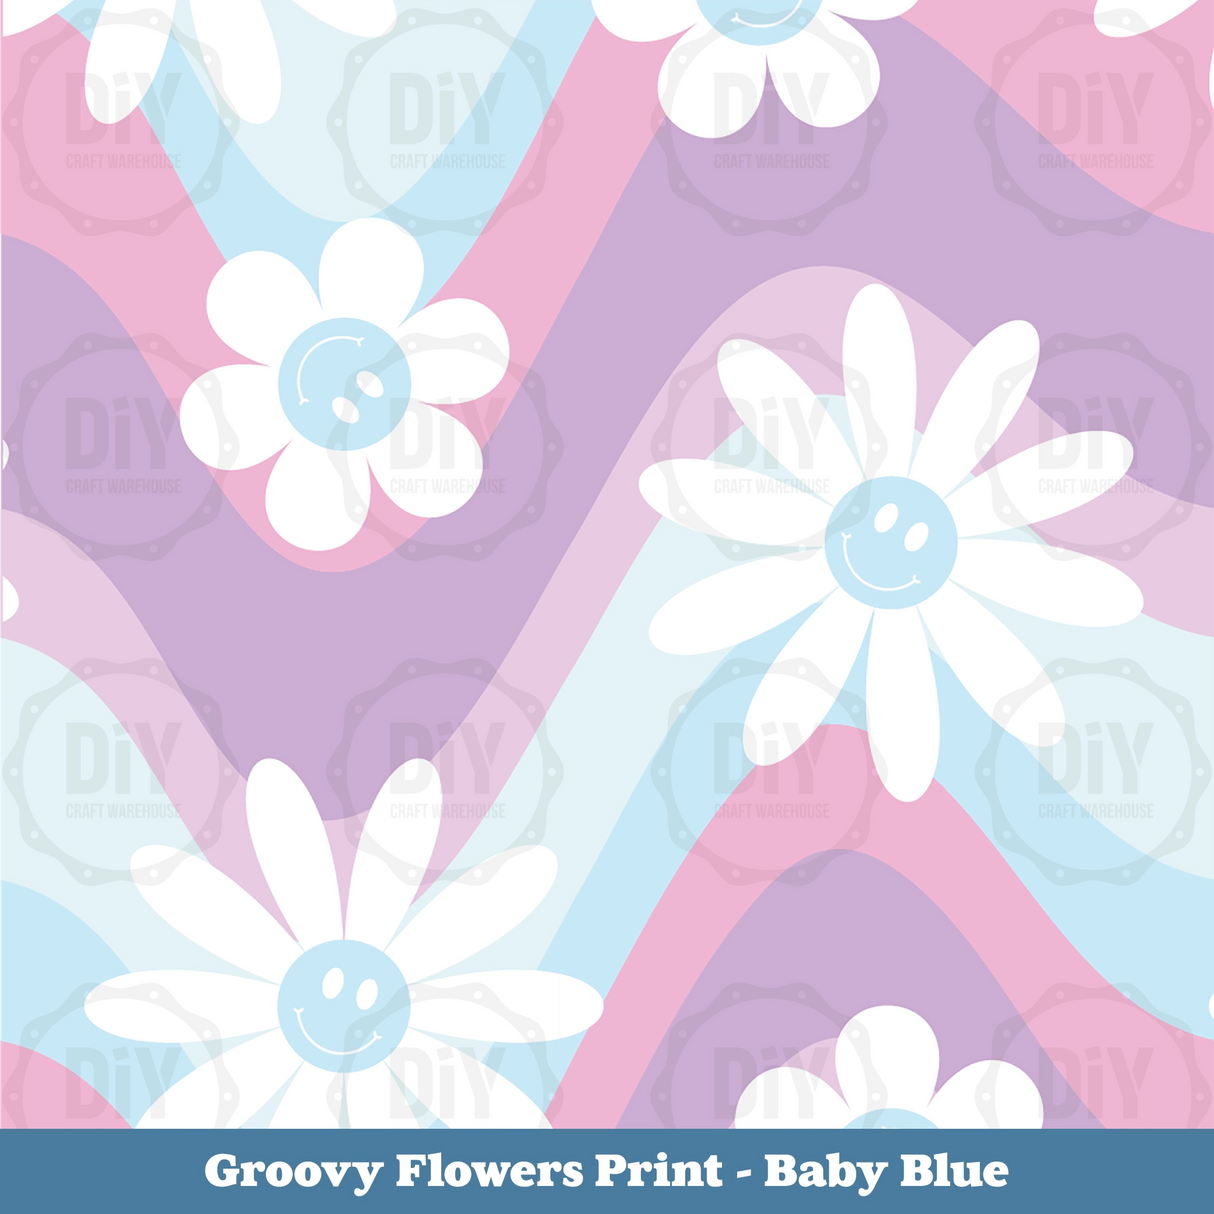 Groovy Flowers Sublimation Transfer - Baby Blue